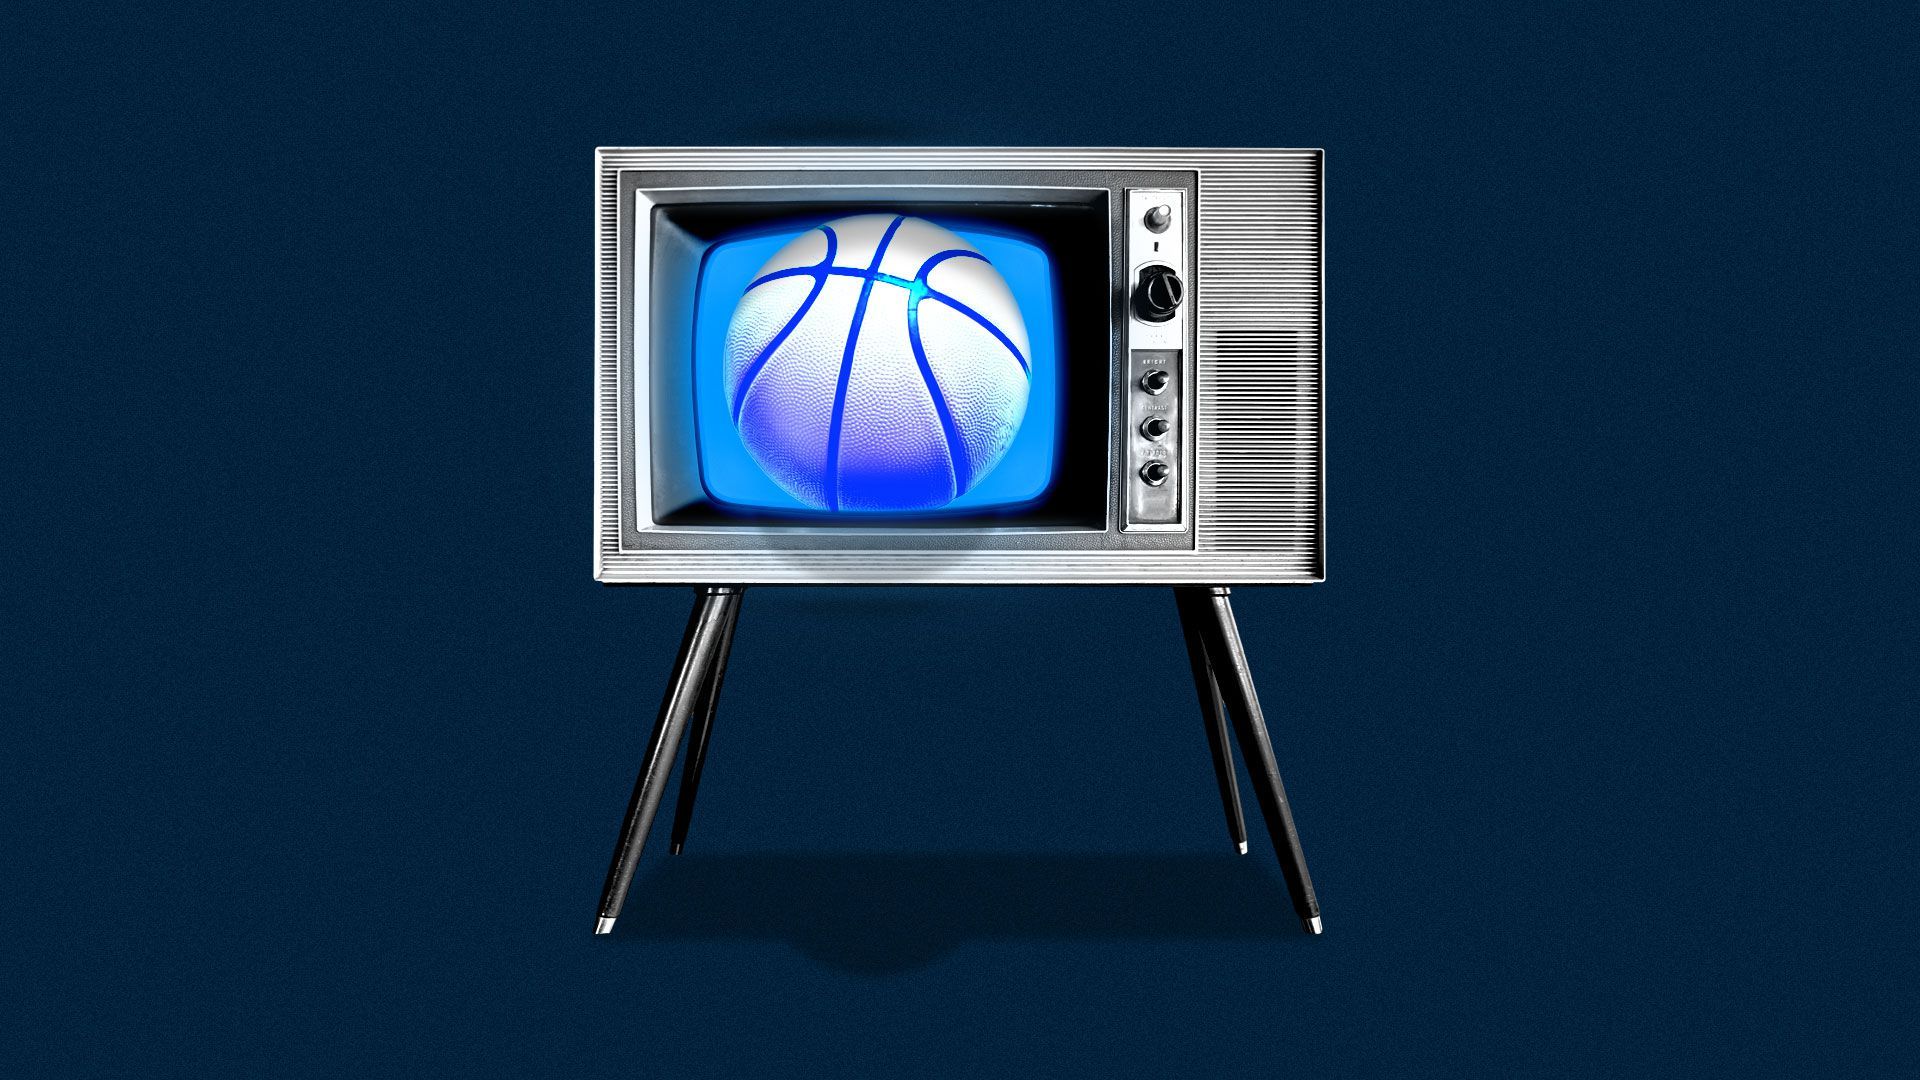 Illustration of glowing tv with a basketball emerging